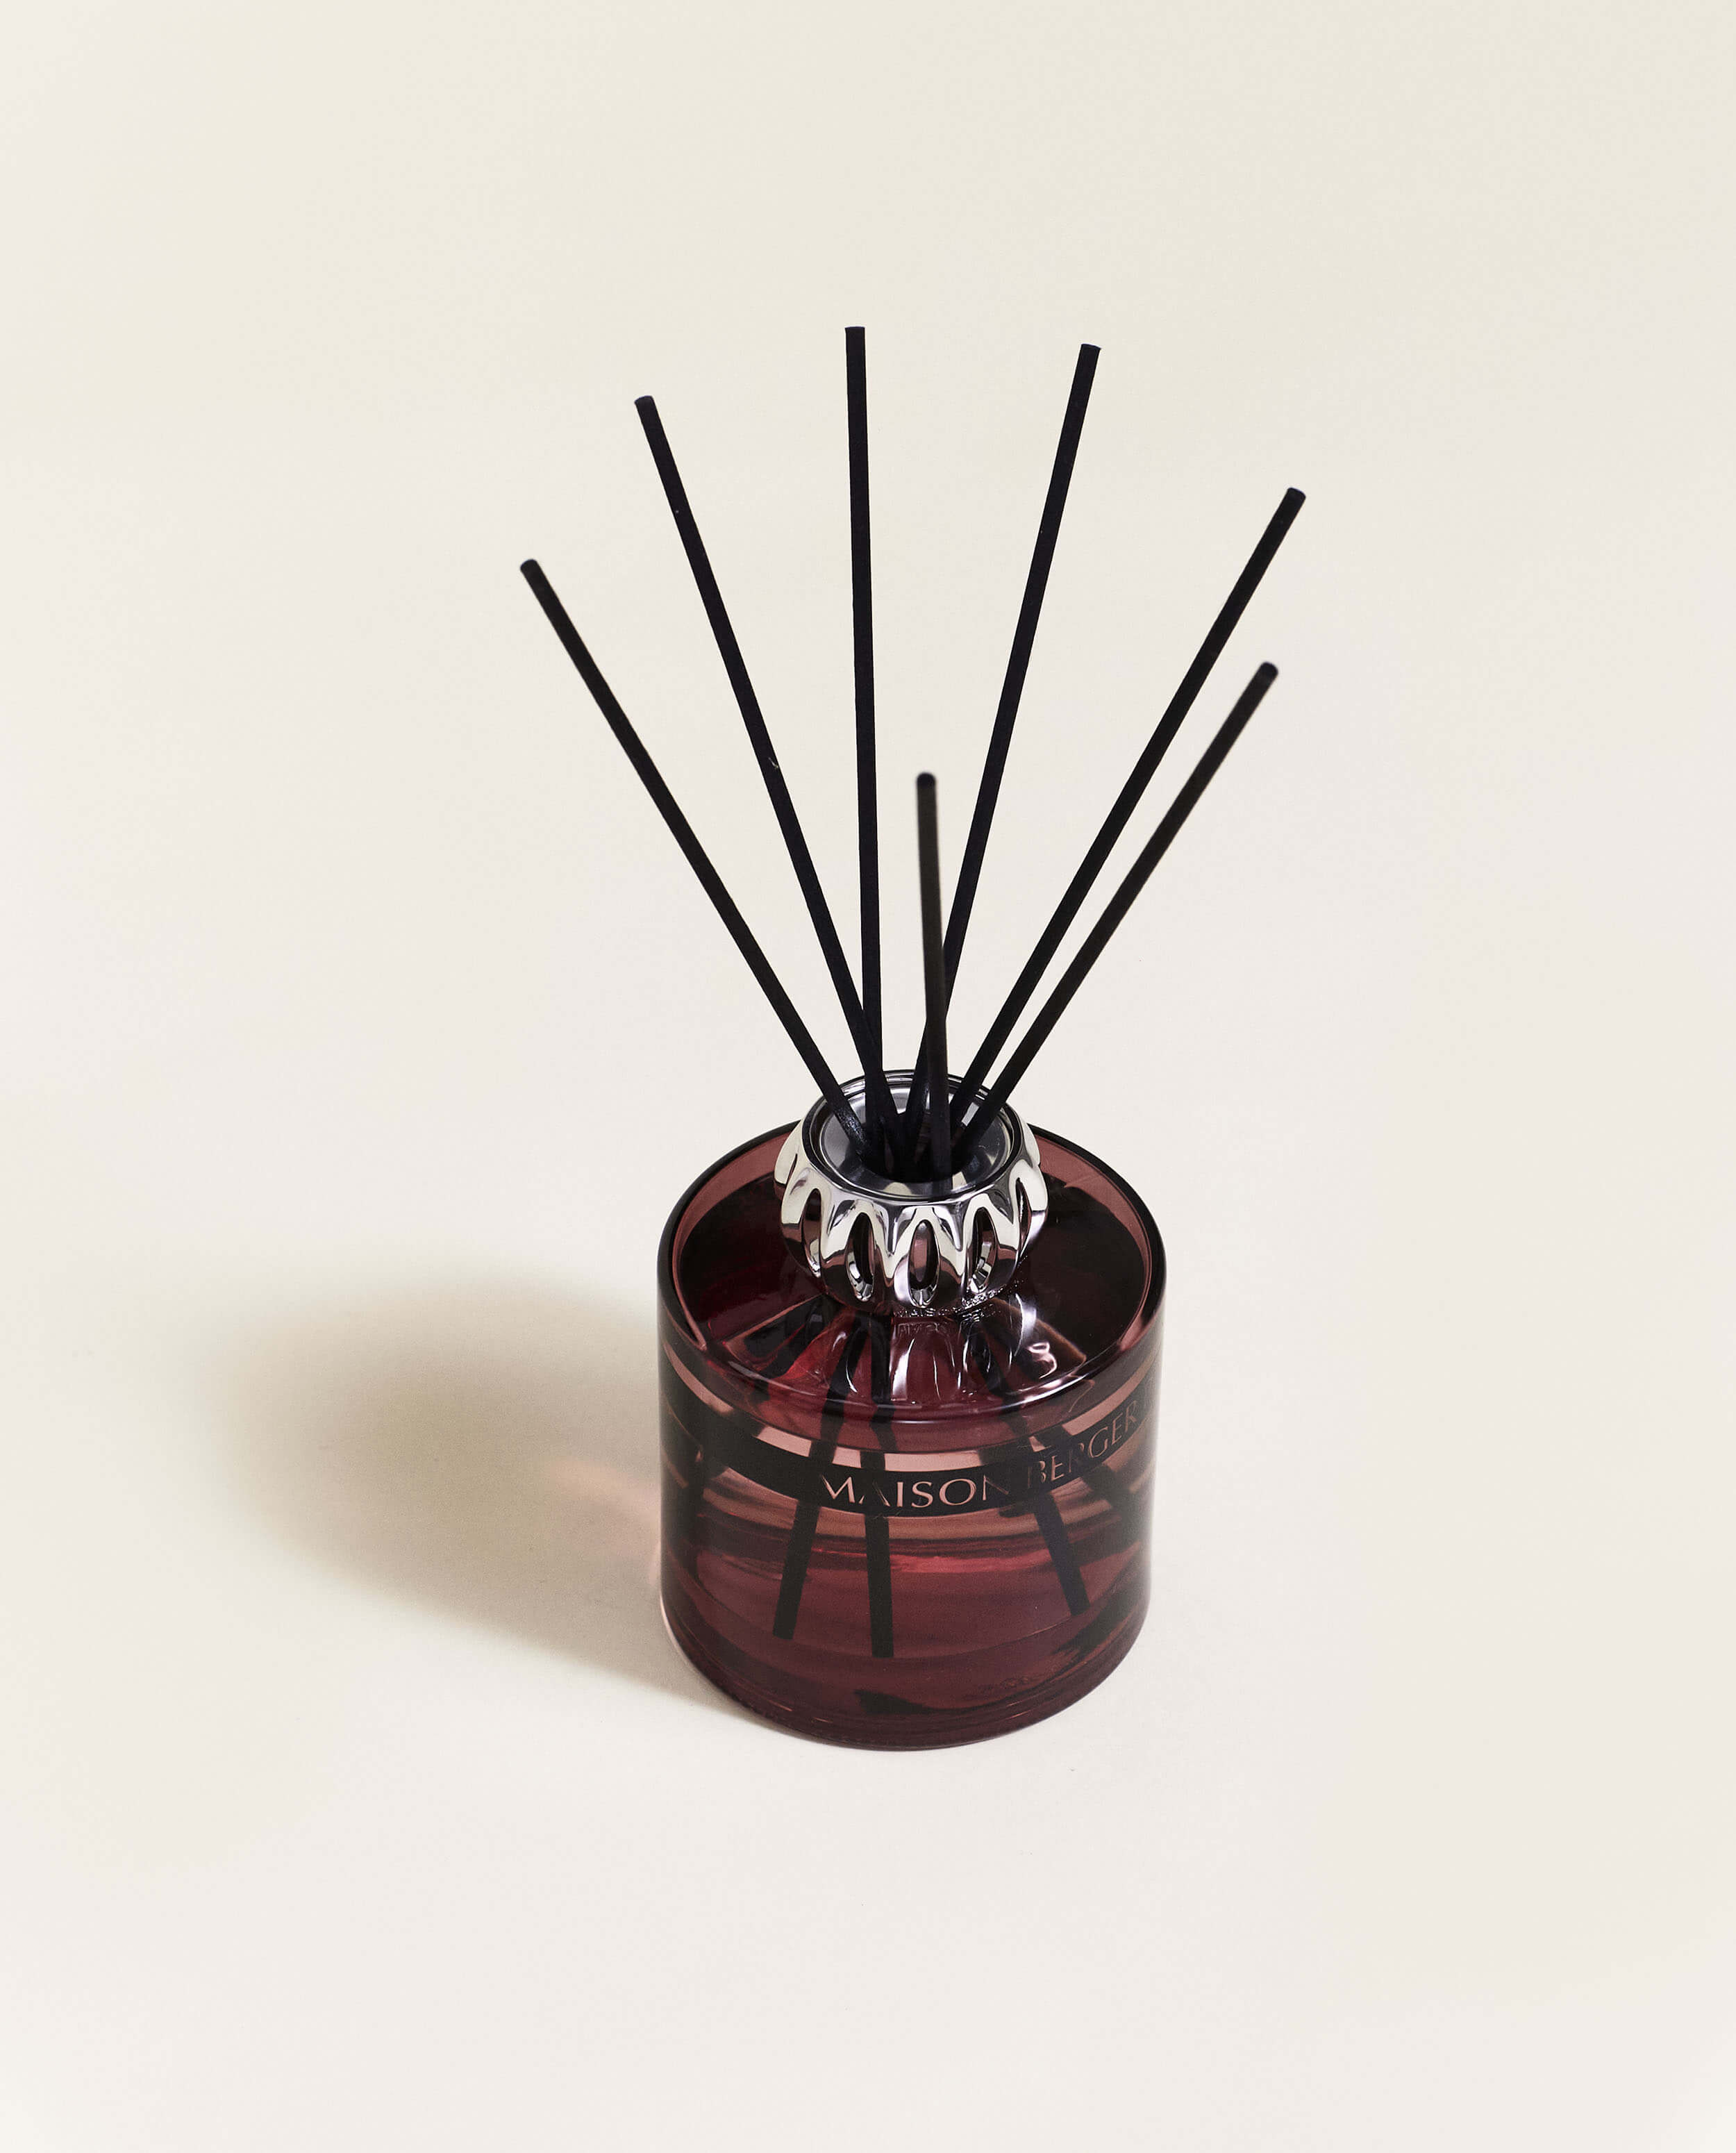 Duality Reed Diffuser Pre-filled with Black Angelica Home Fragrance